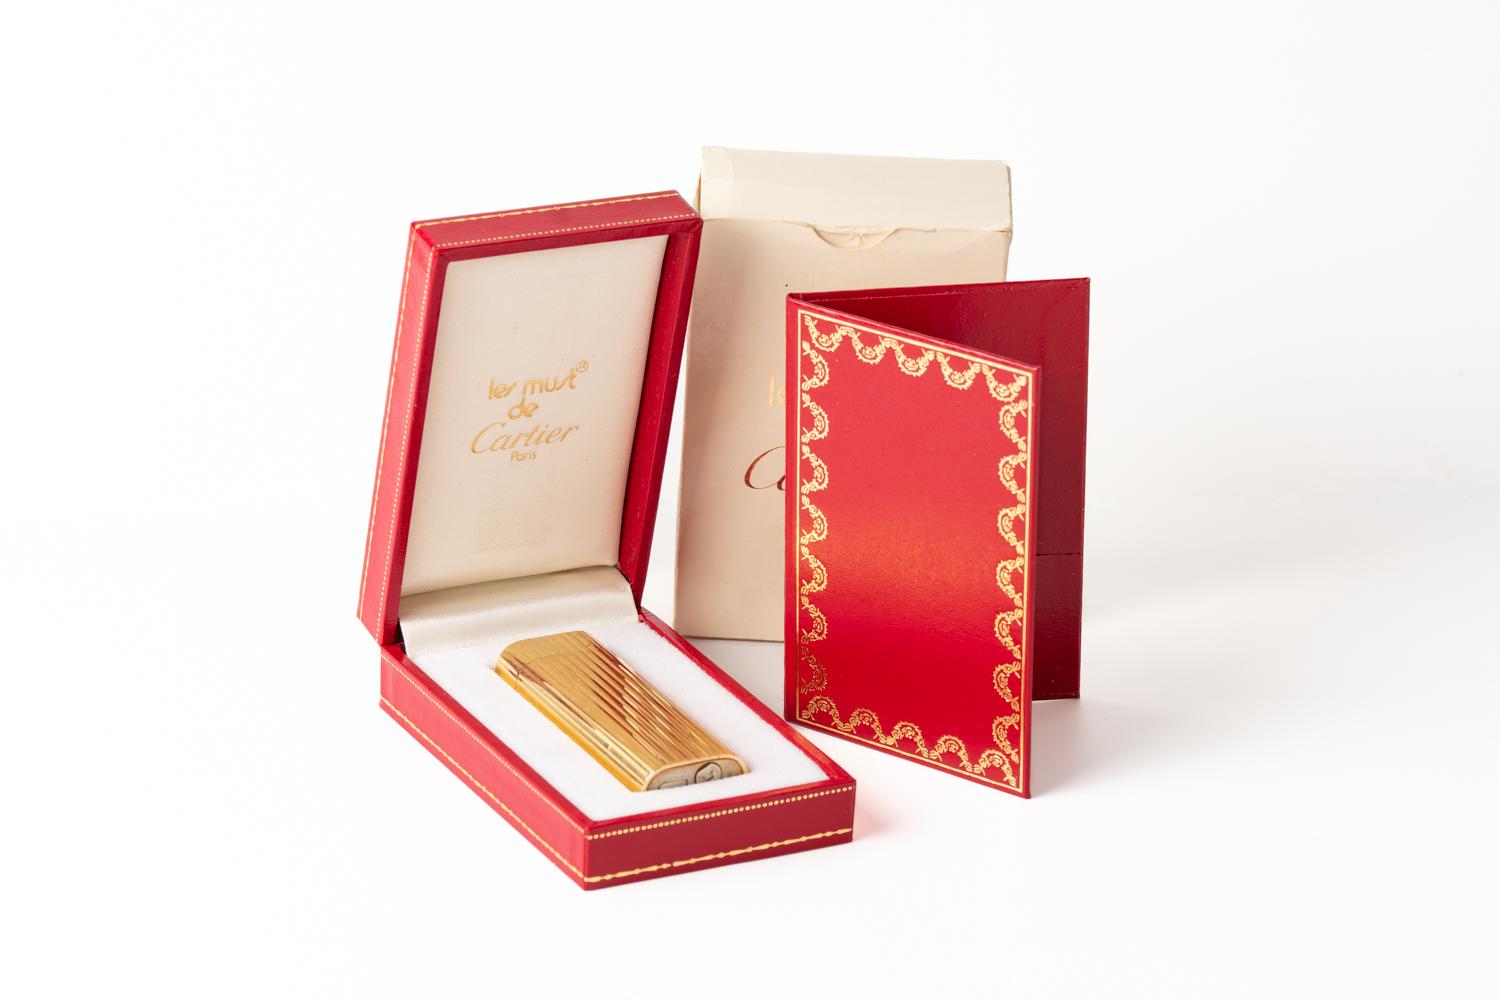 Classic and iconic vintage Must De Cartier Stripe Gold Plated Lighter with original red Cartier box and Cartier extractor. The bottom of the lighter is stamped 'Cartier', 'Paris', and 'SWISS MADE' with serial number: 46637D. The lighter is not in a